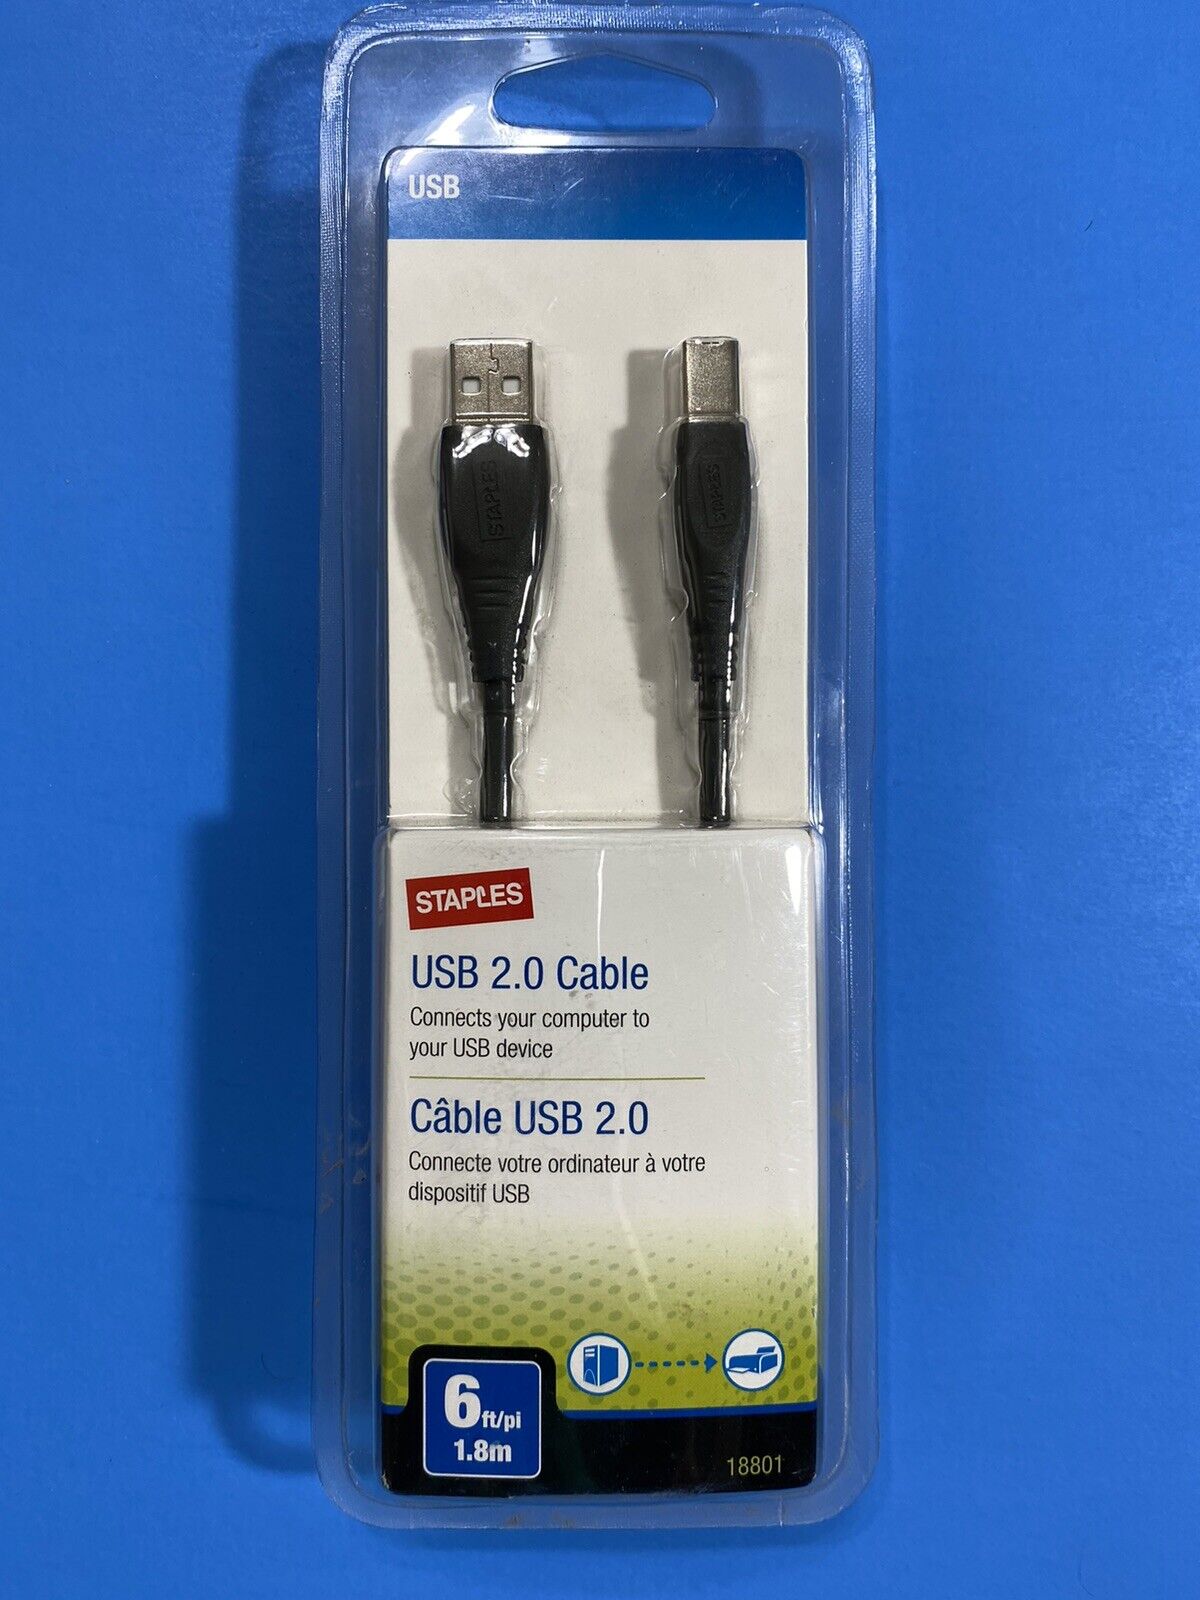 Staples USB 2.0 Cable 6ft 1.8m - New Sealed